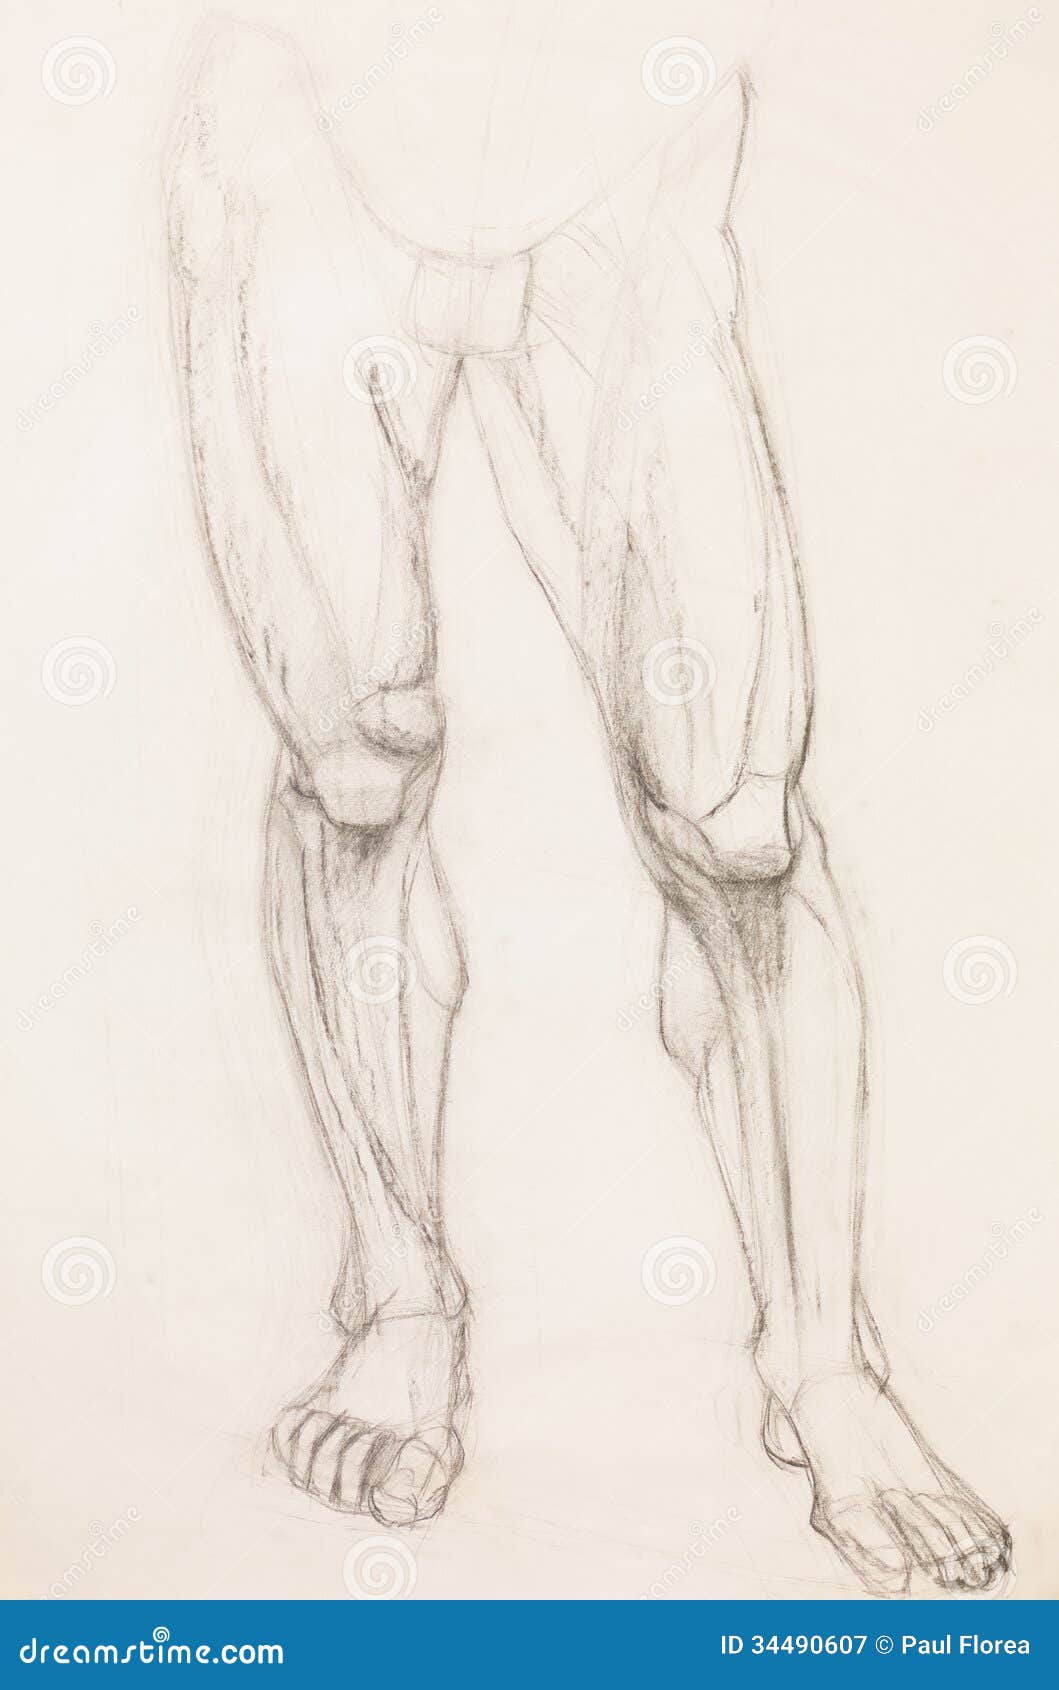 Anatomical study of the muscles of the right arm and torso  Works of Art   RA Collection  Royal Academy of Arts